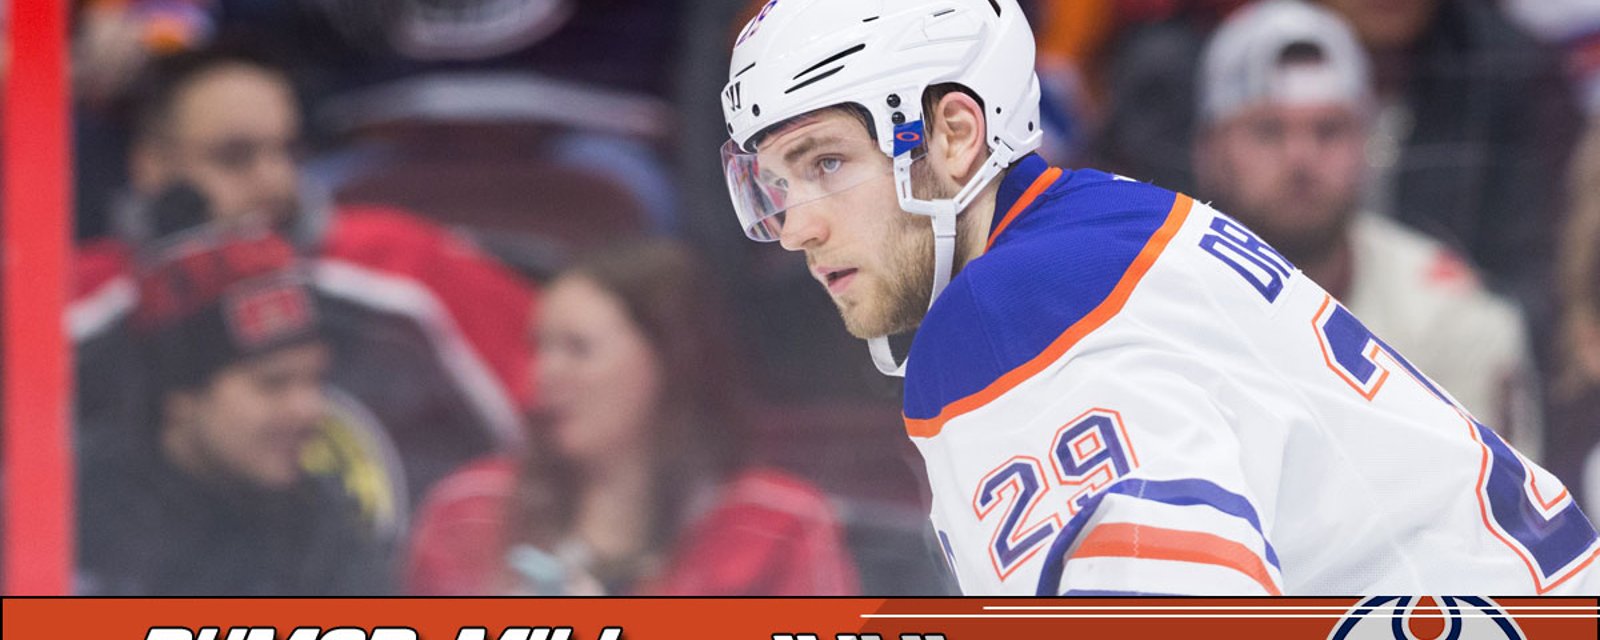 Insider reports CRAZY numbers for Draisaitl's next contract